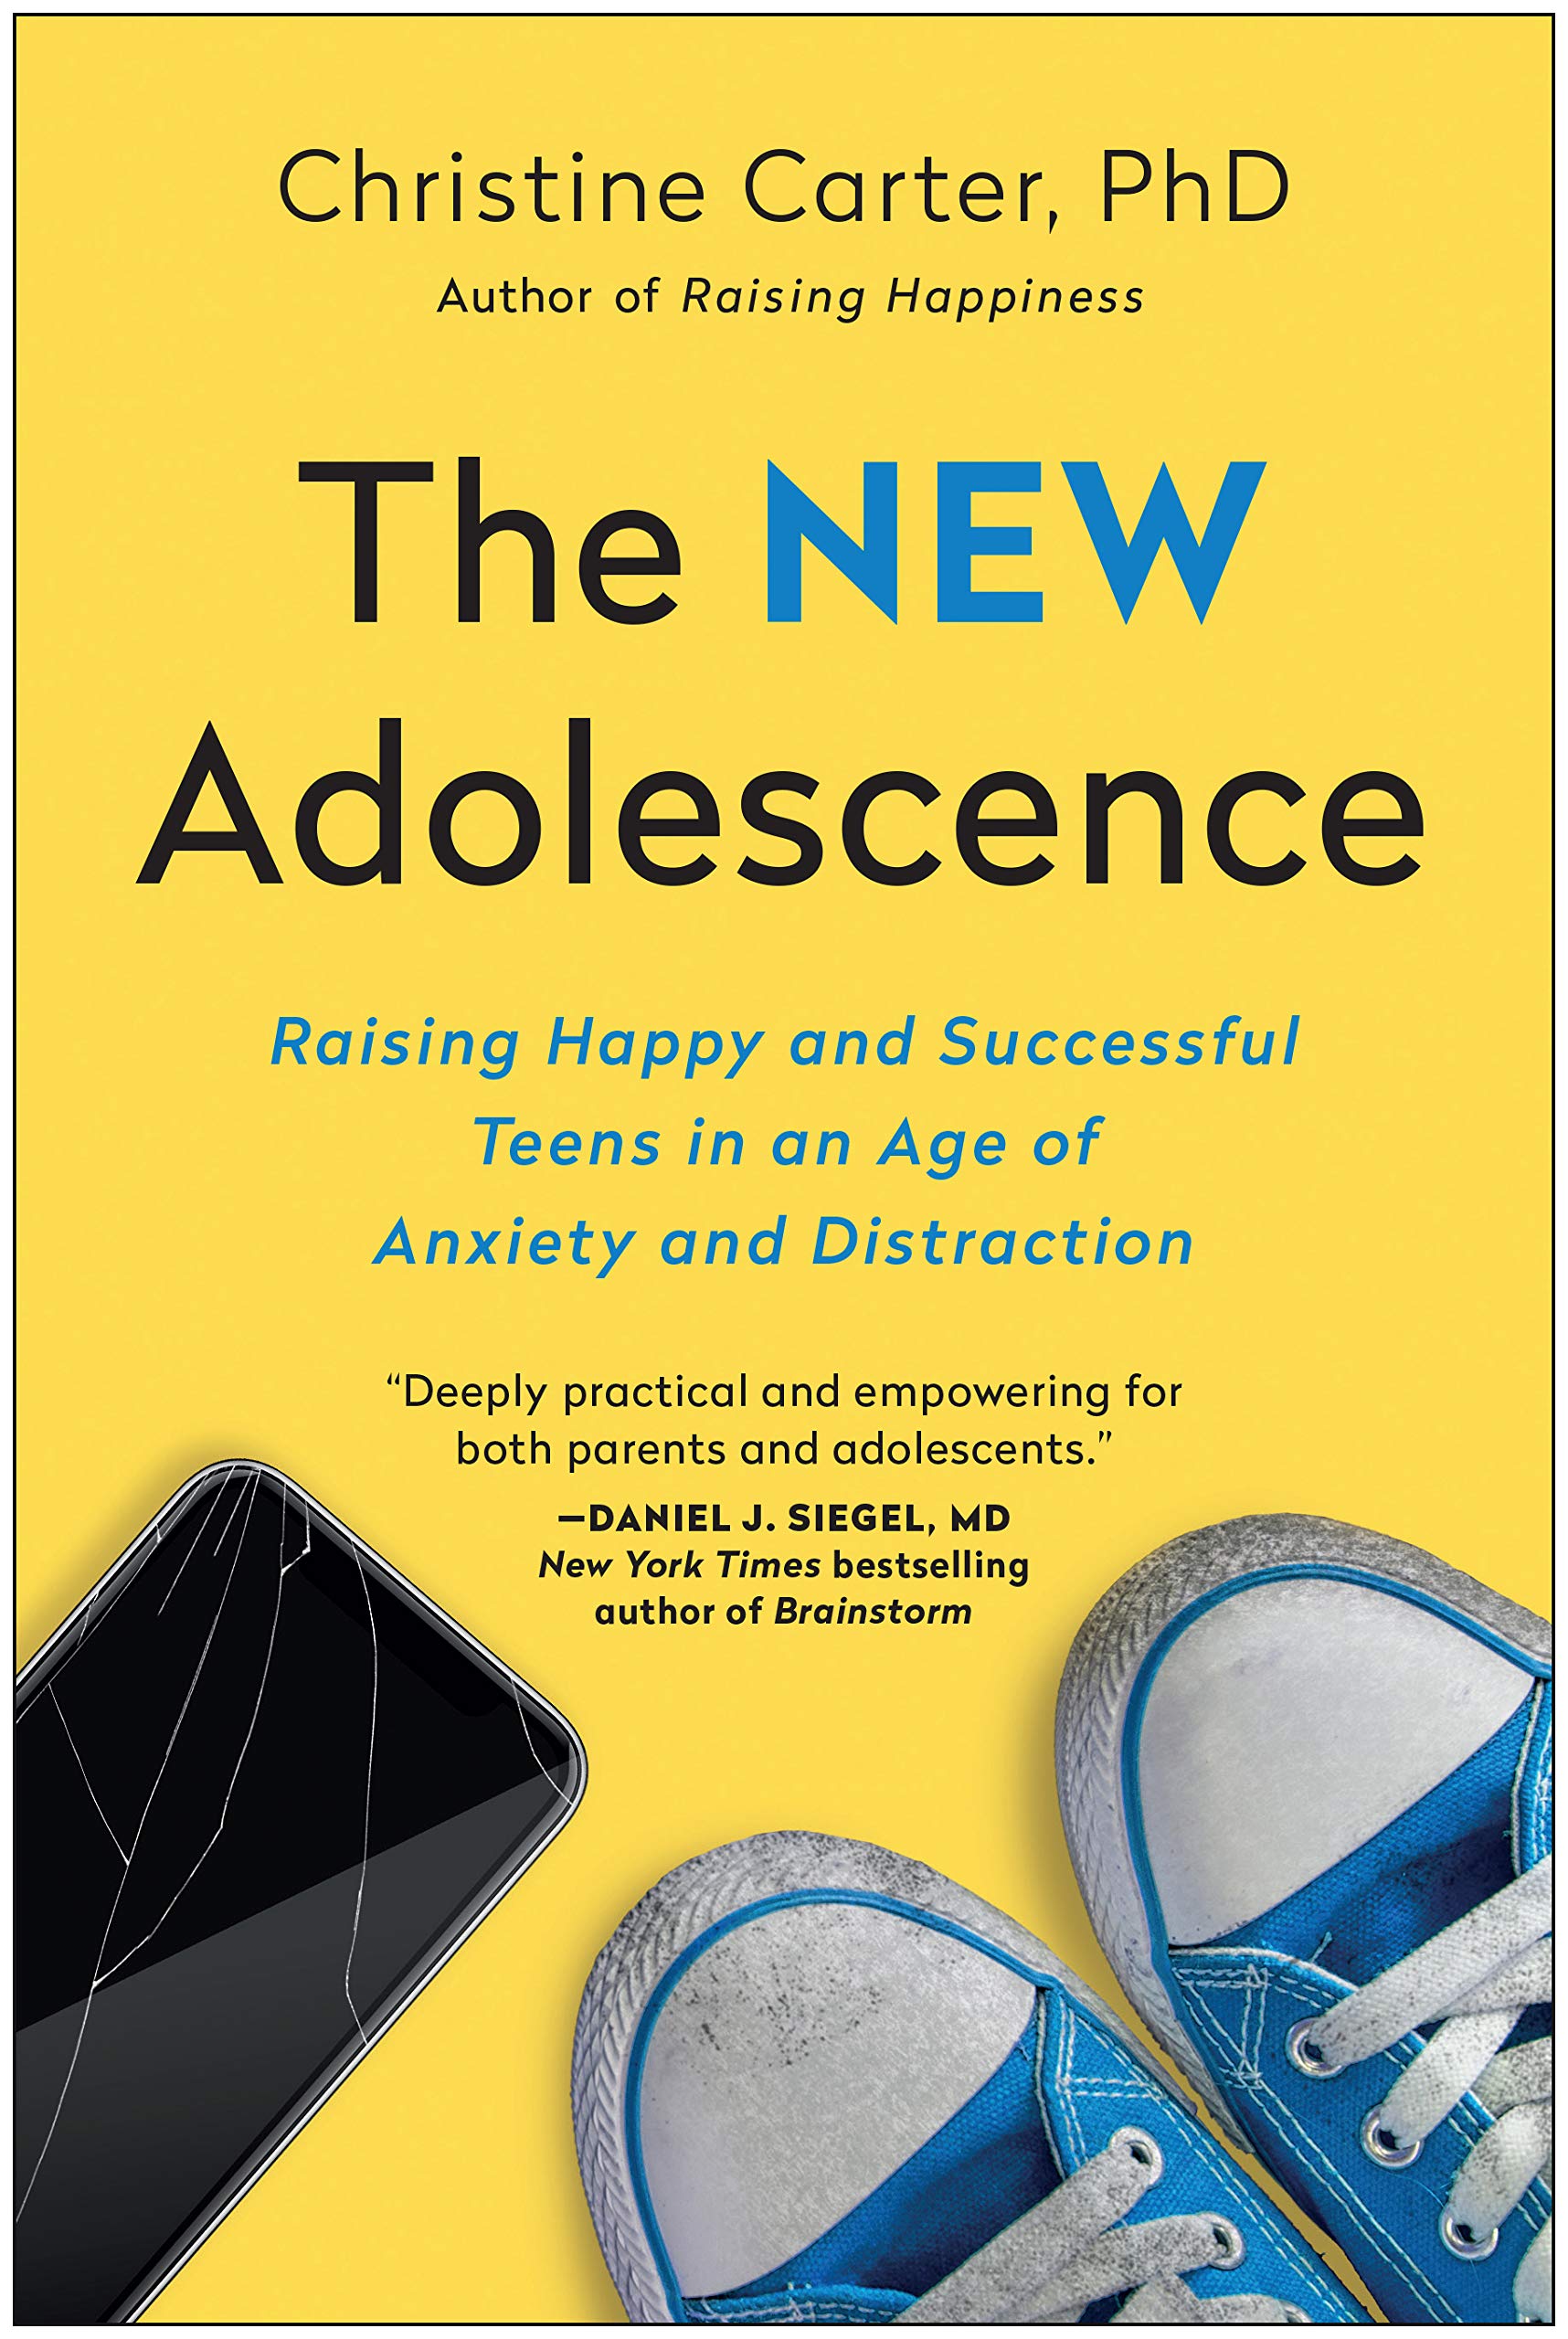 The New Adolescence: Raising Happy and Successful Teens in an Age of Anxiety and Distraction